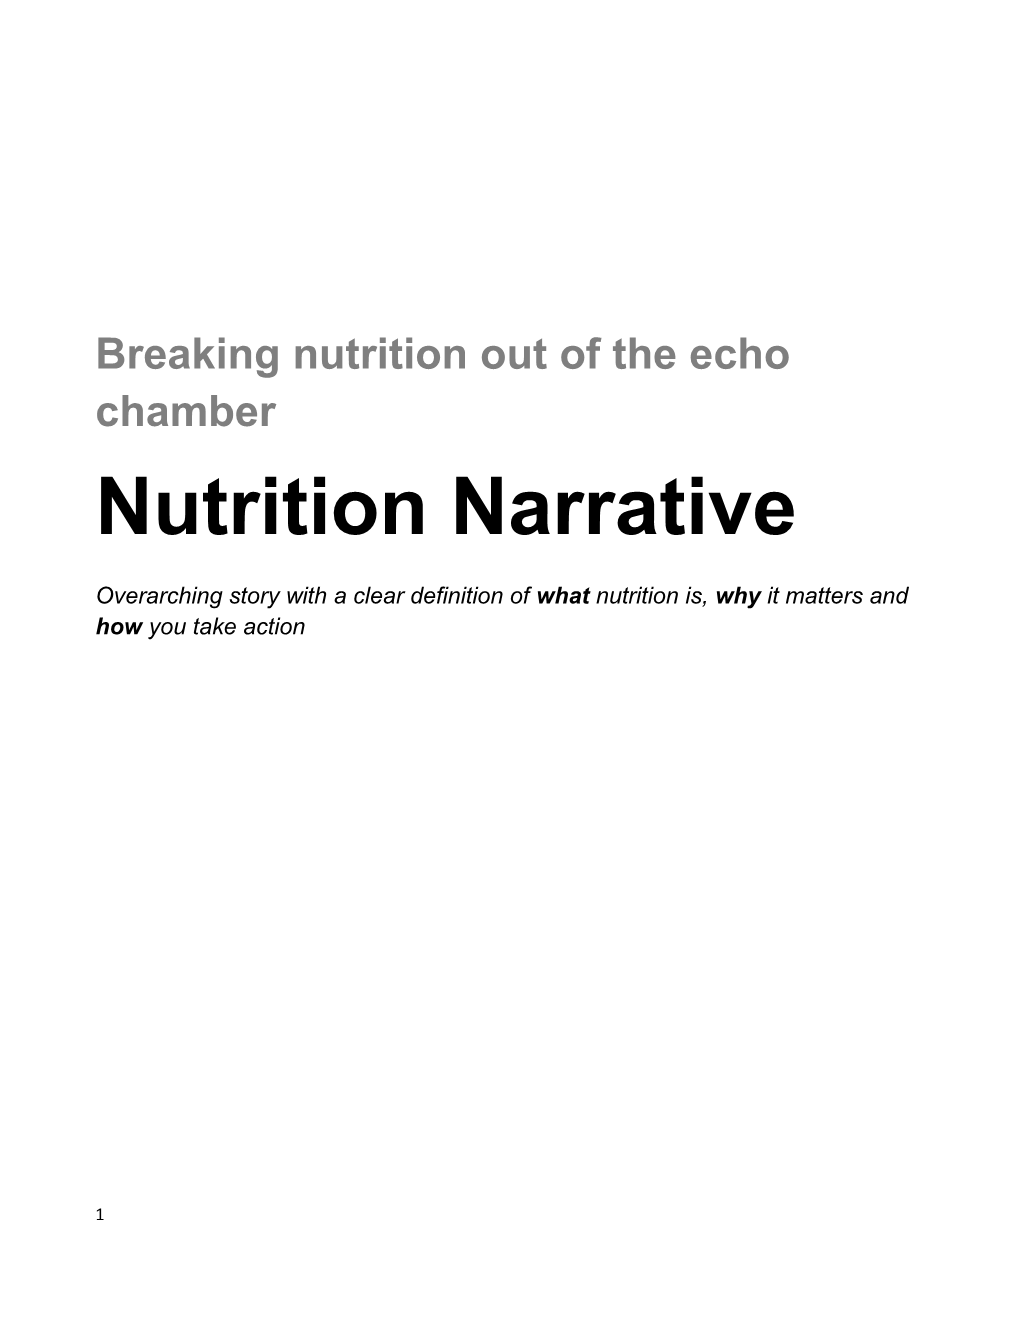 Breaking Nutrition out of the Echo Chamber